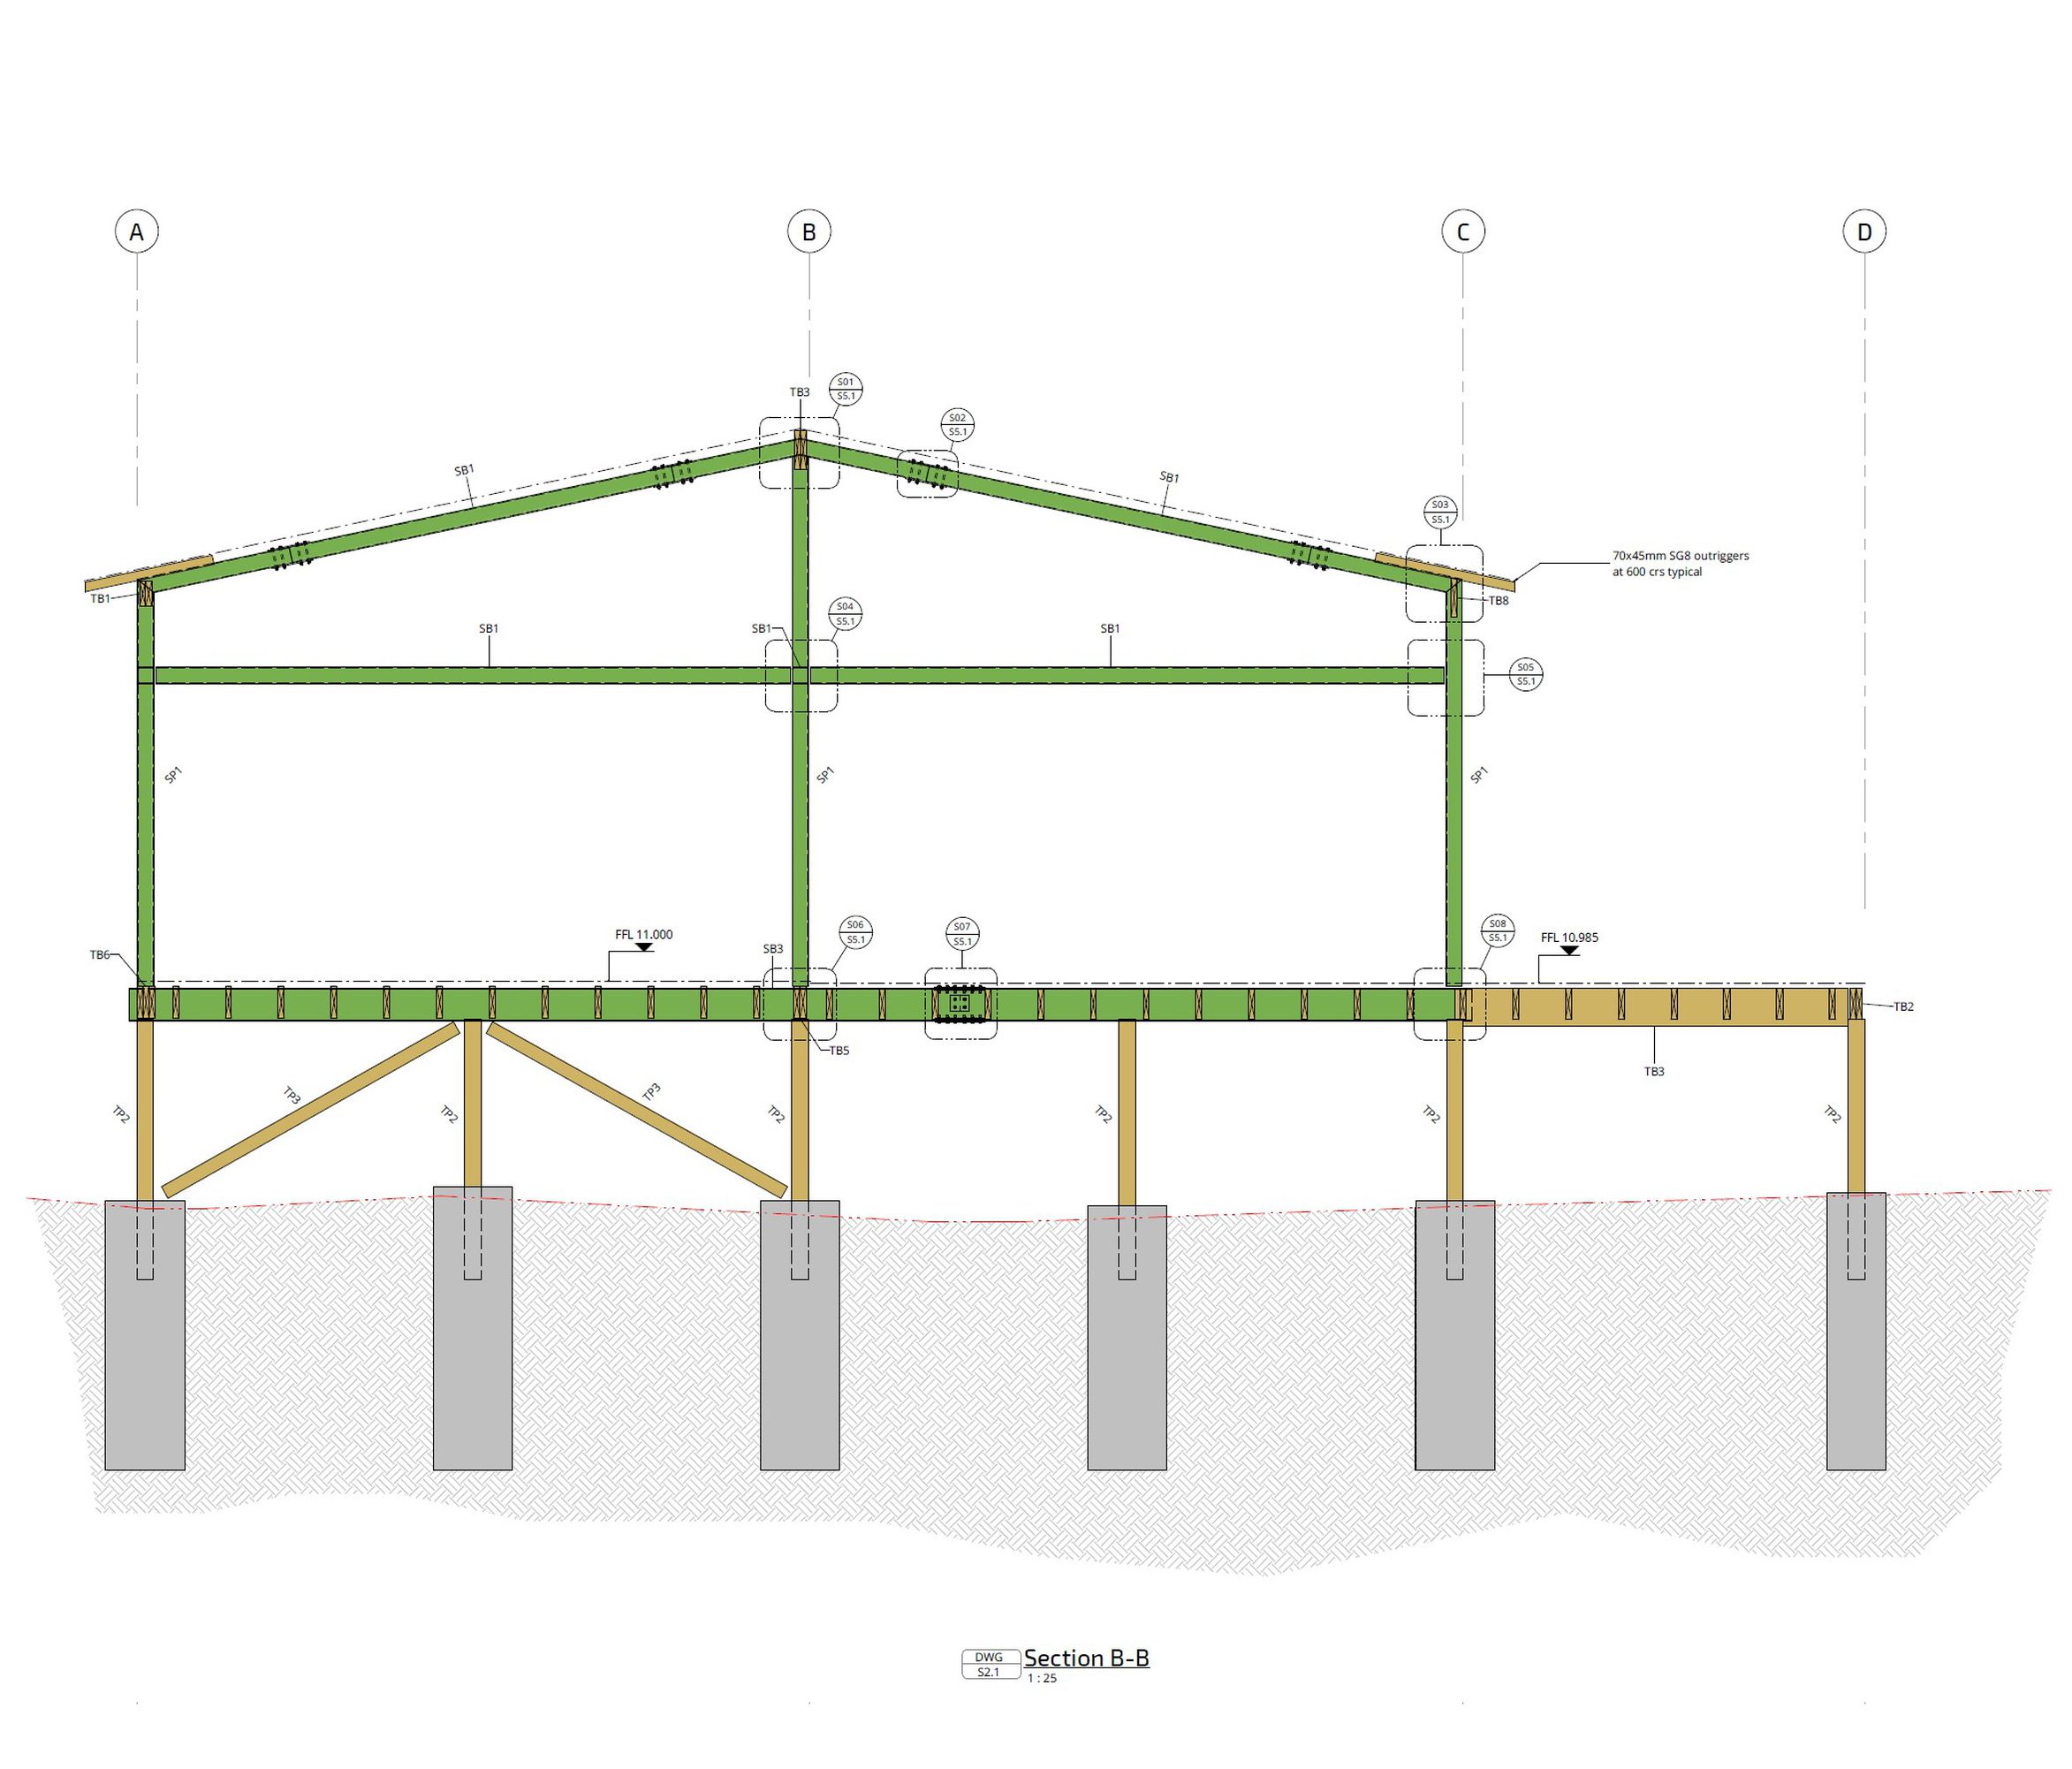 Revit Drawing - Section